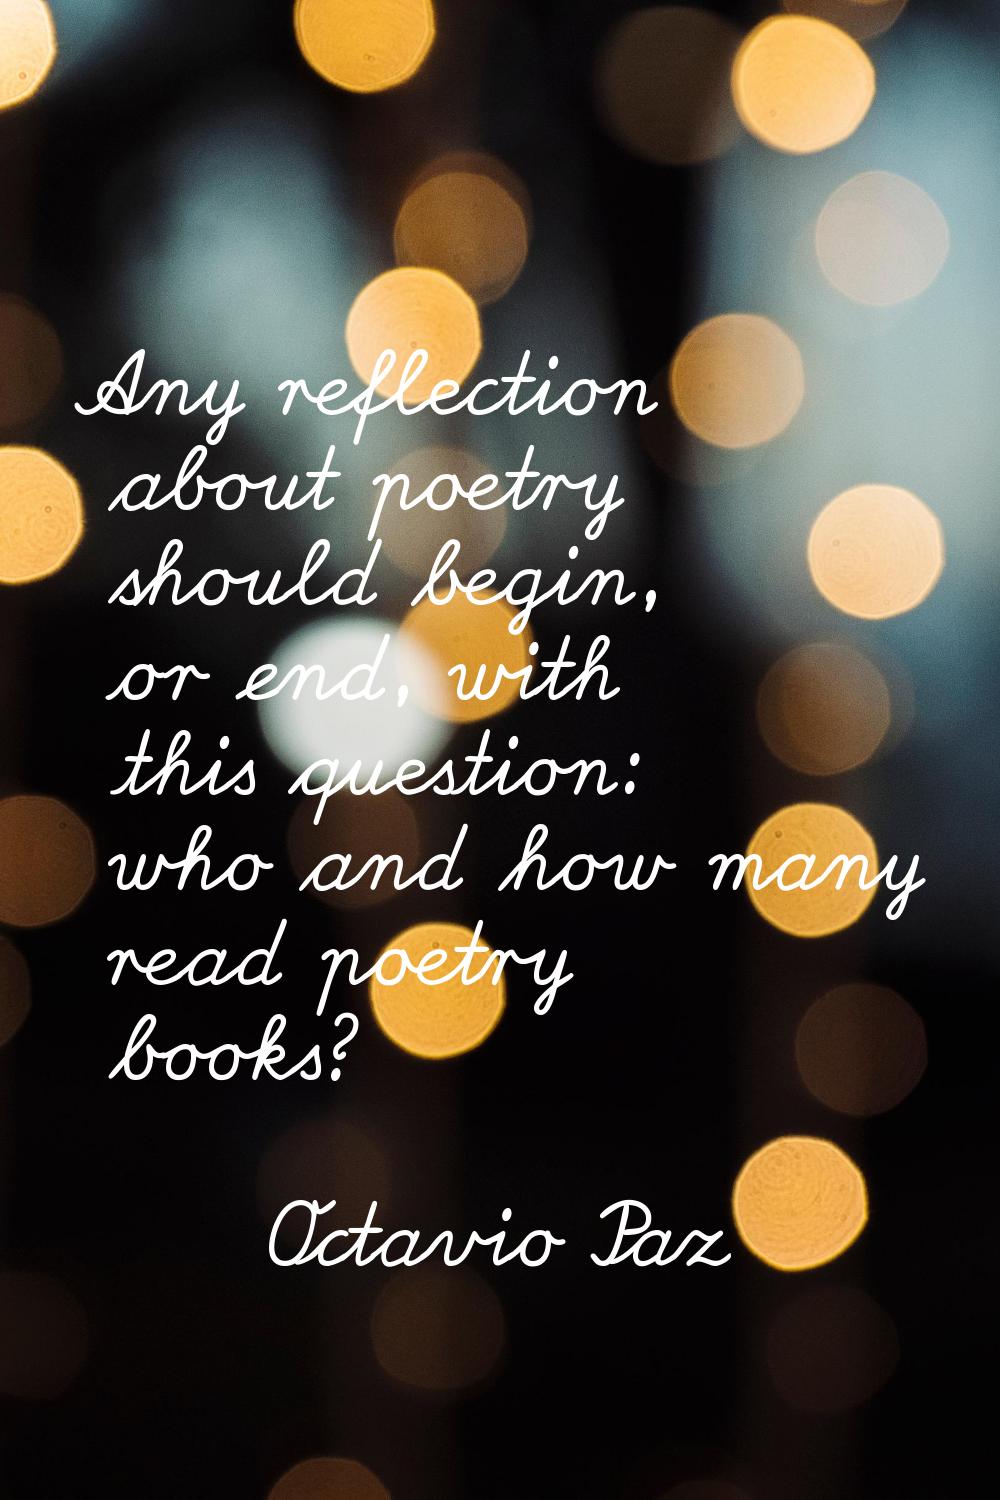 Any reflection about poetry should begin, or end, with this question: who and how many read poetry 